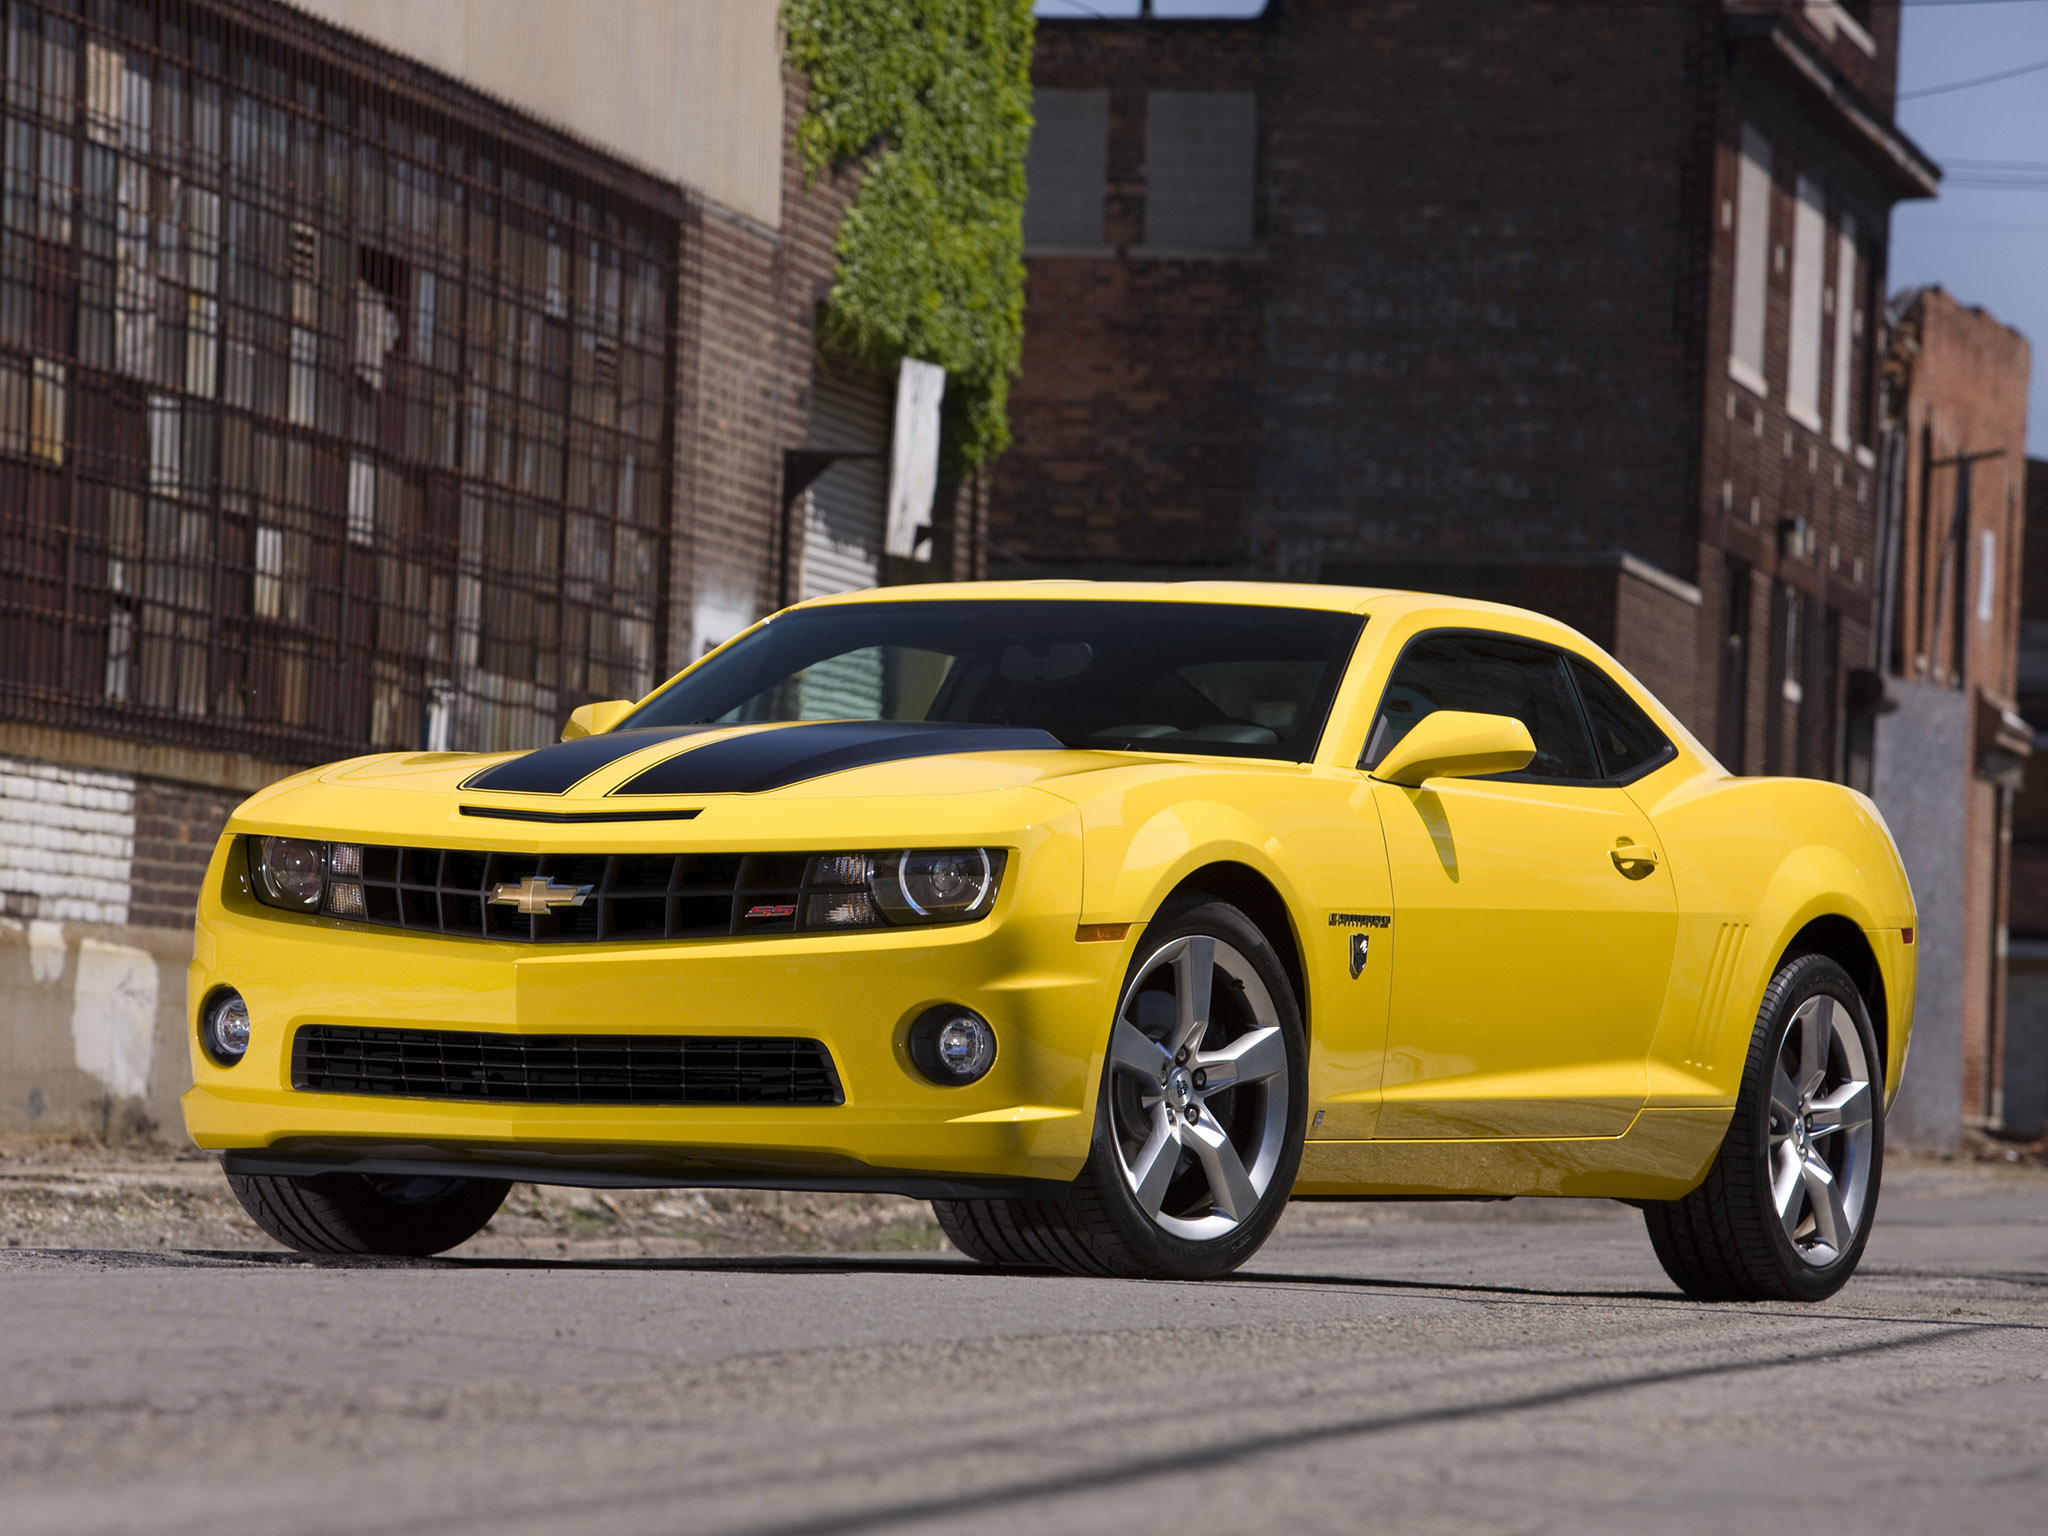 2010, Chevrolet, Camaro, Transformers, Special, Muscle Wallpaper